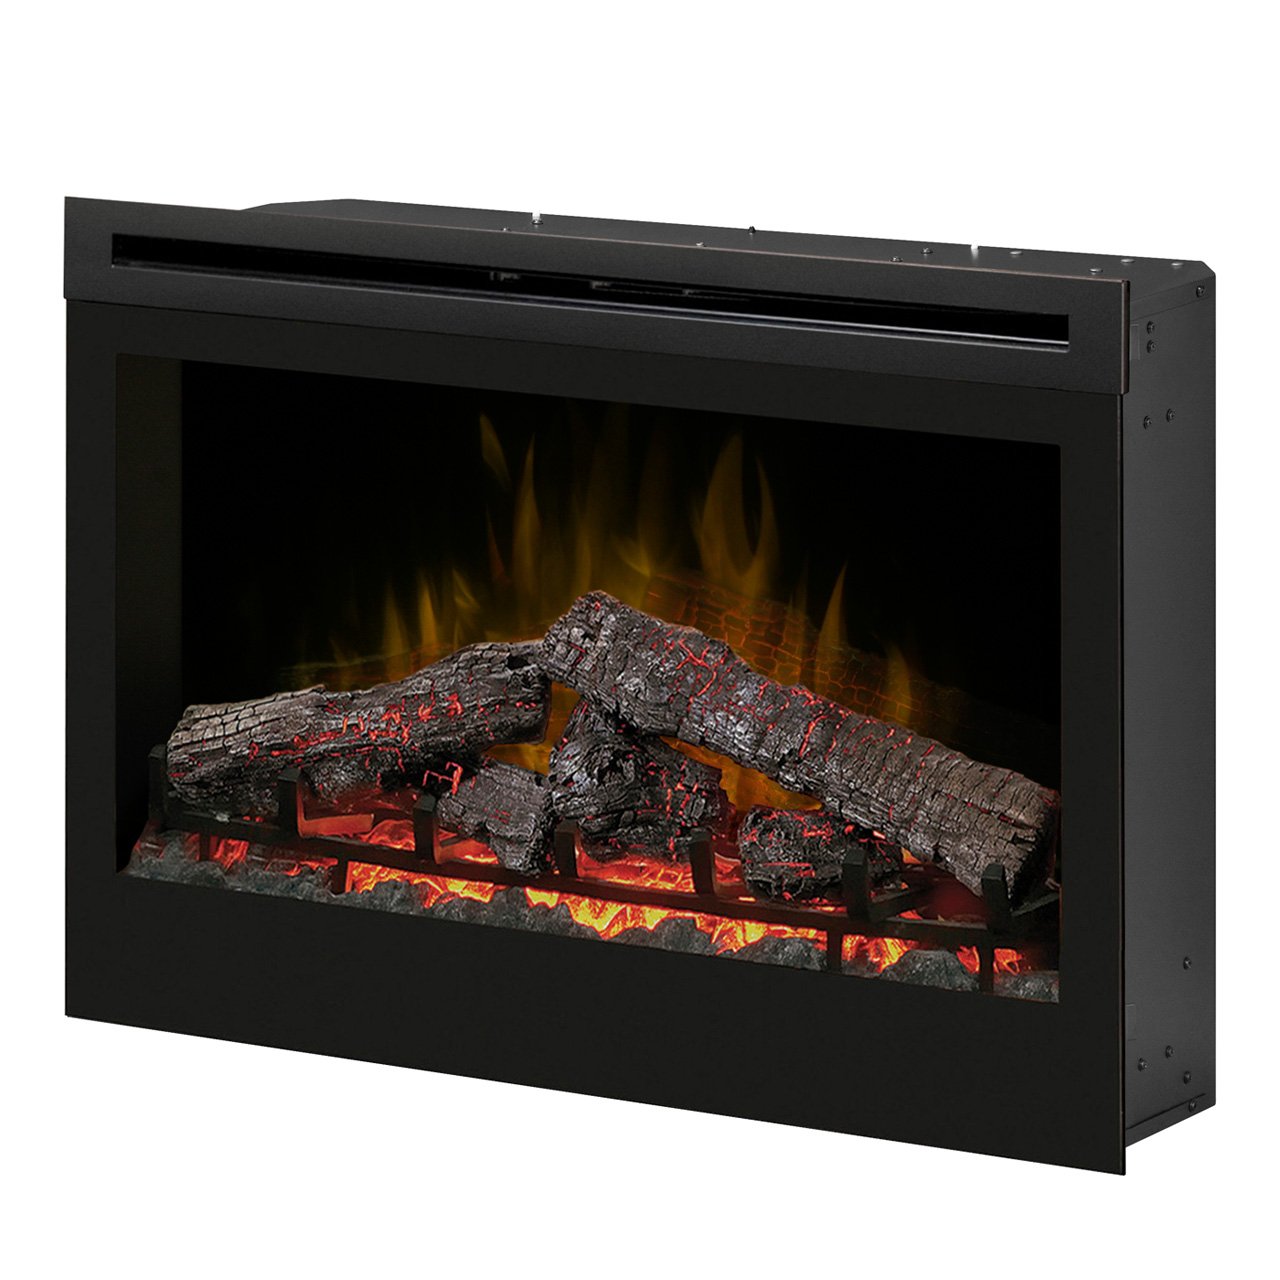 Modern Gas Fireplace Insert Best Of Dimplex Df3033st 33 Inch Self Trimming Electric Fireplace Insert